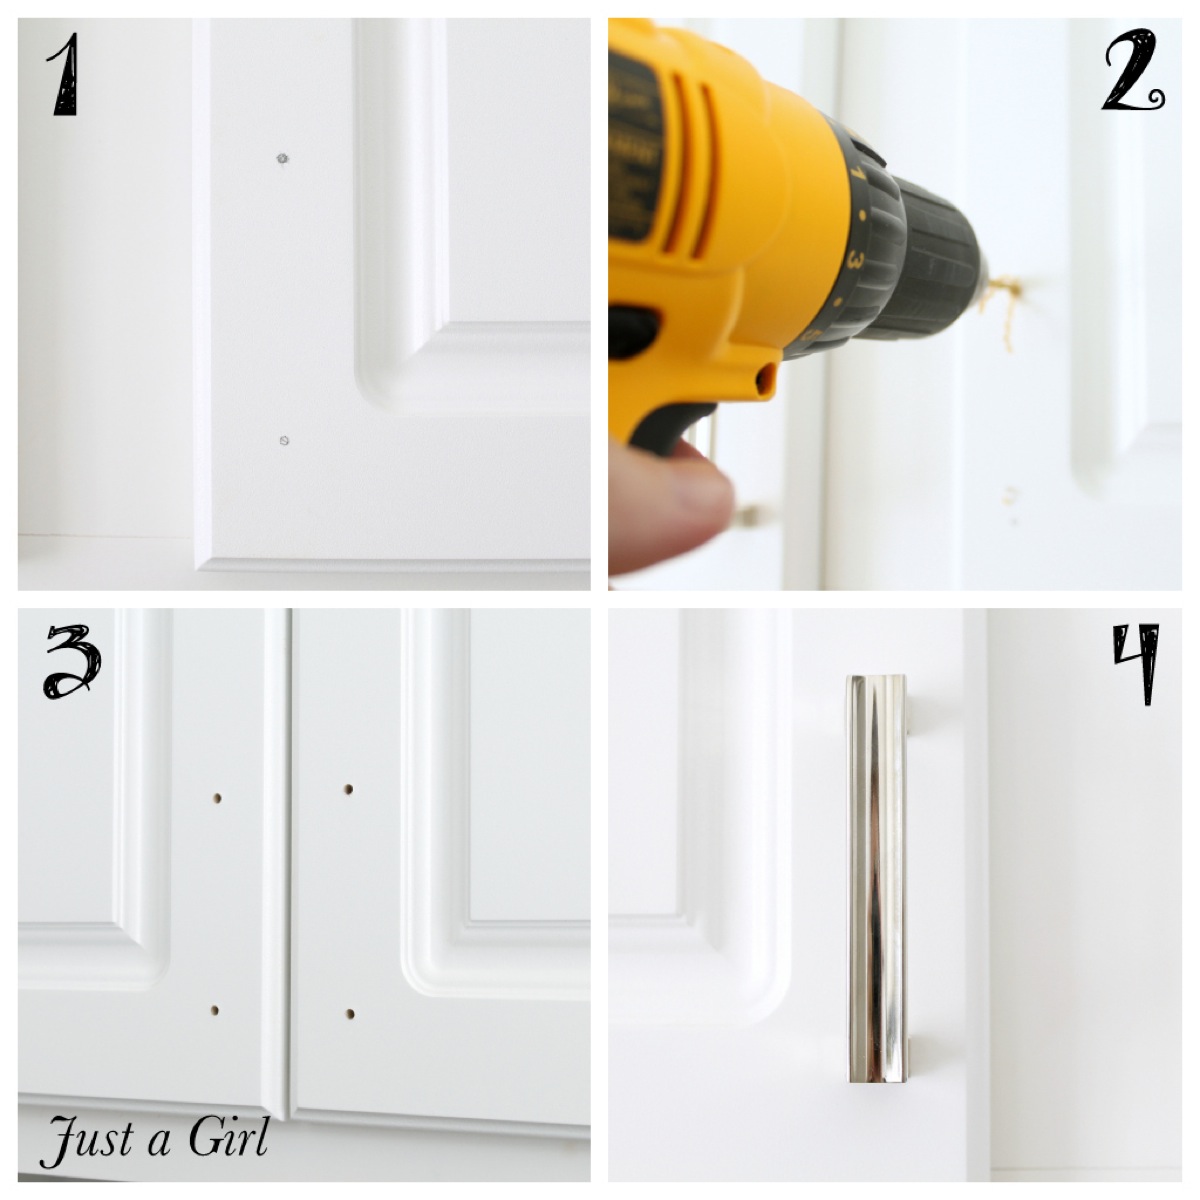 How To Install Cabinet Hardware Just, How To Install Kitchen Drawer Hardware